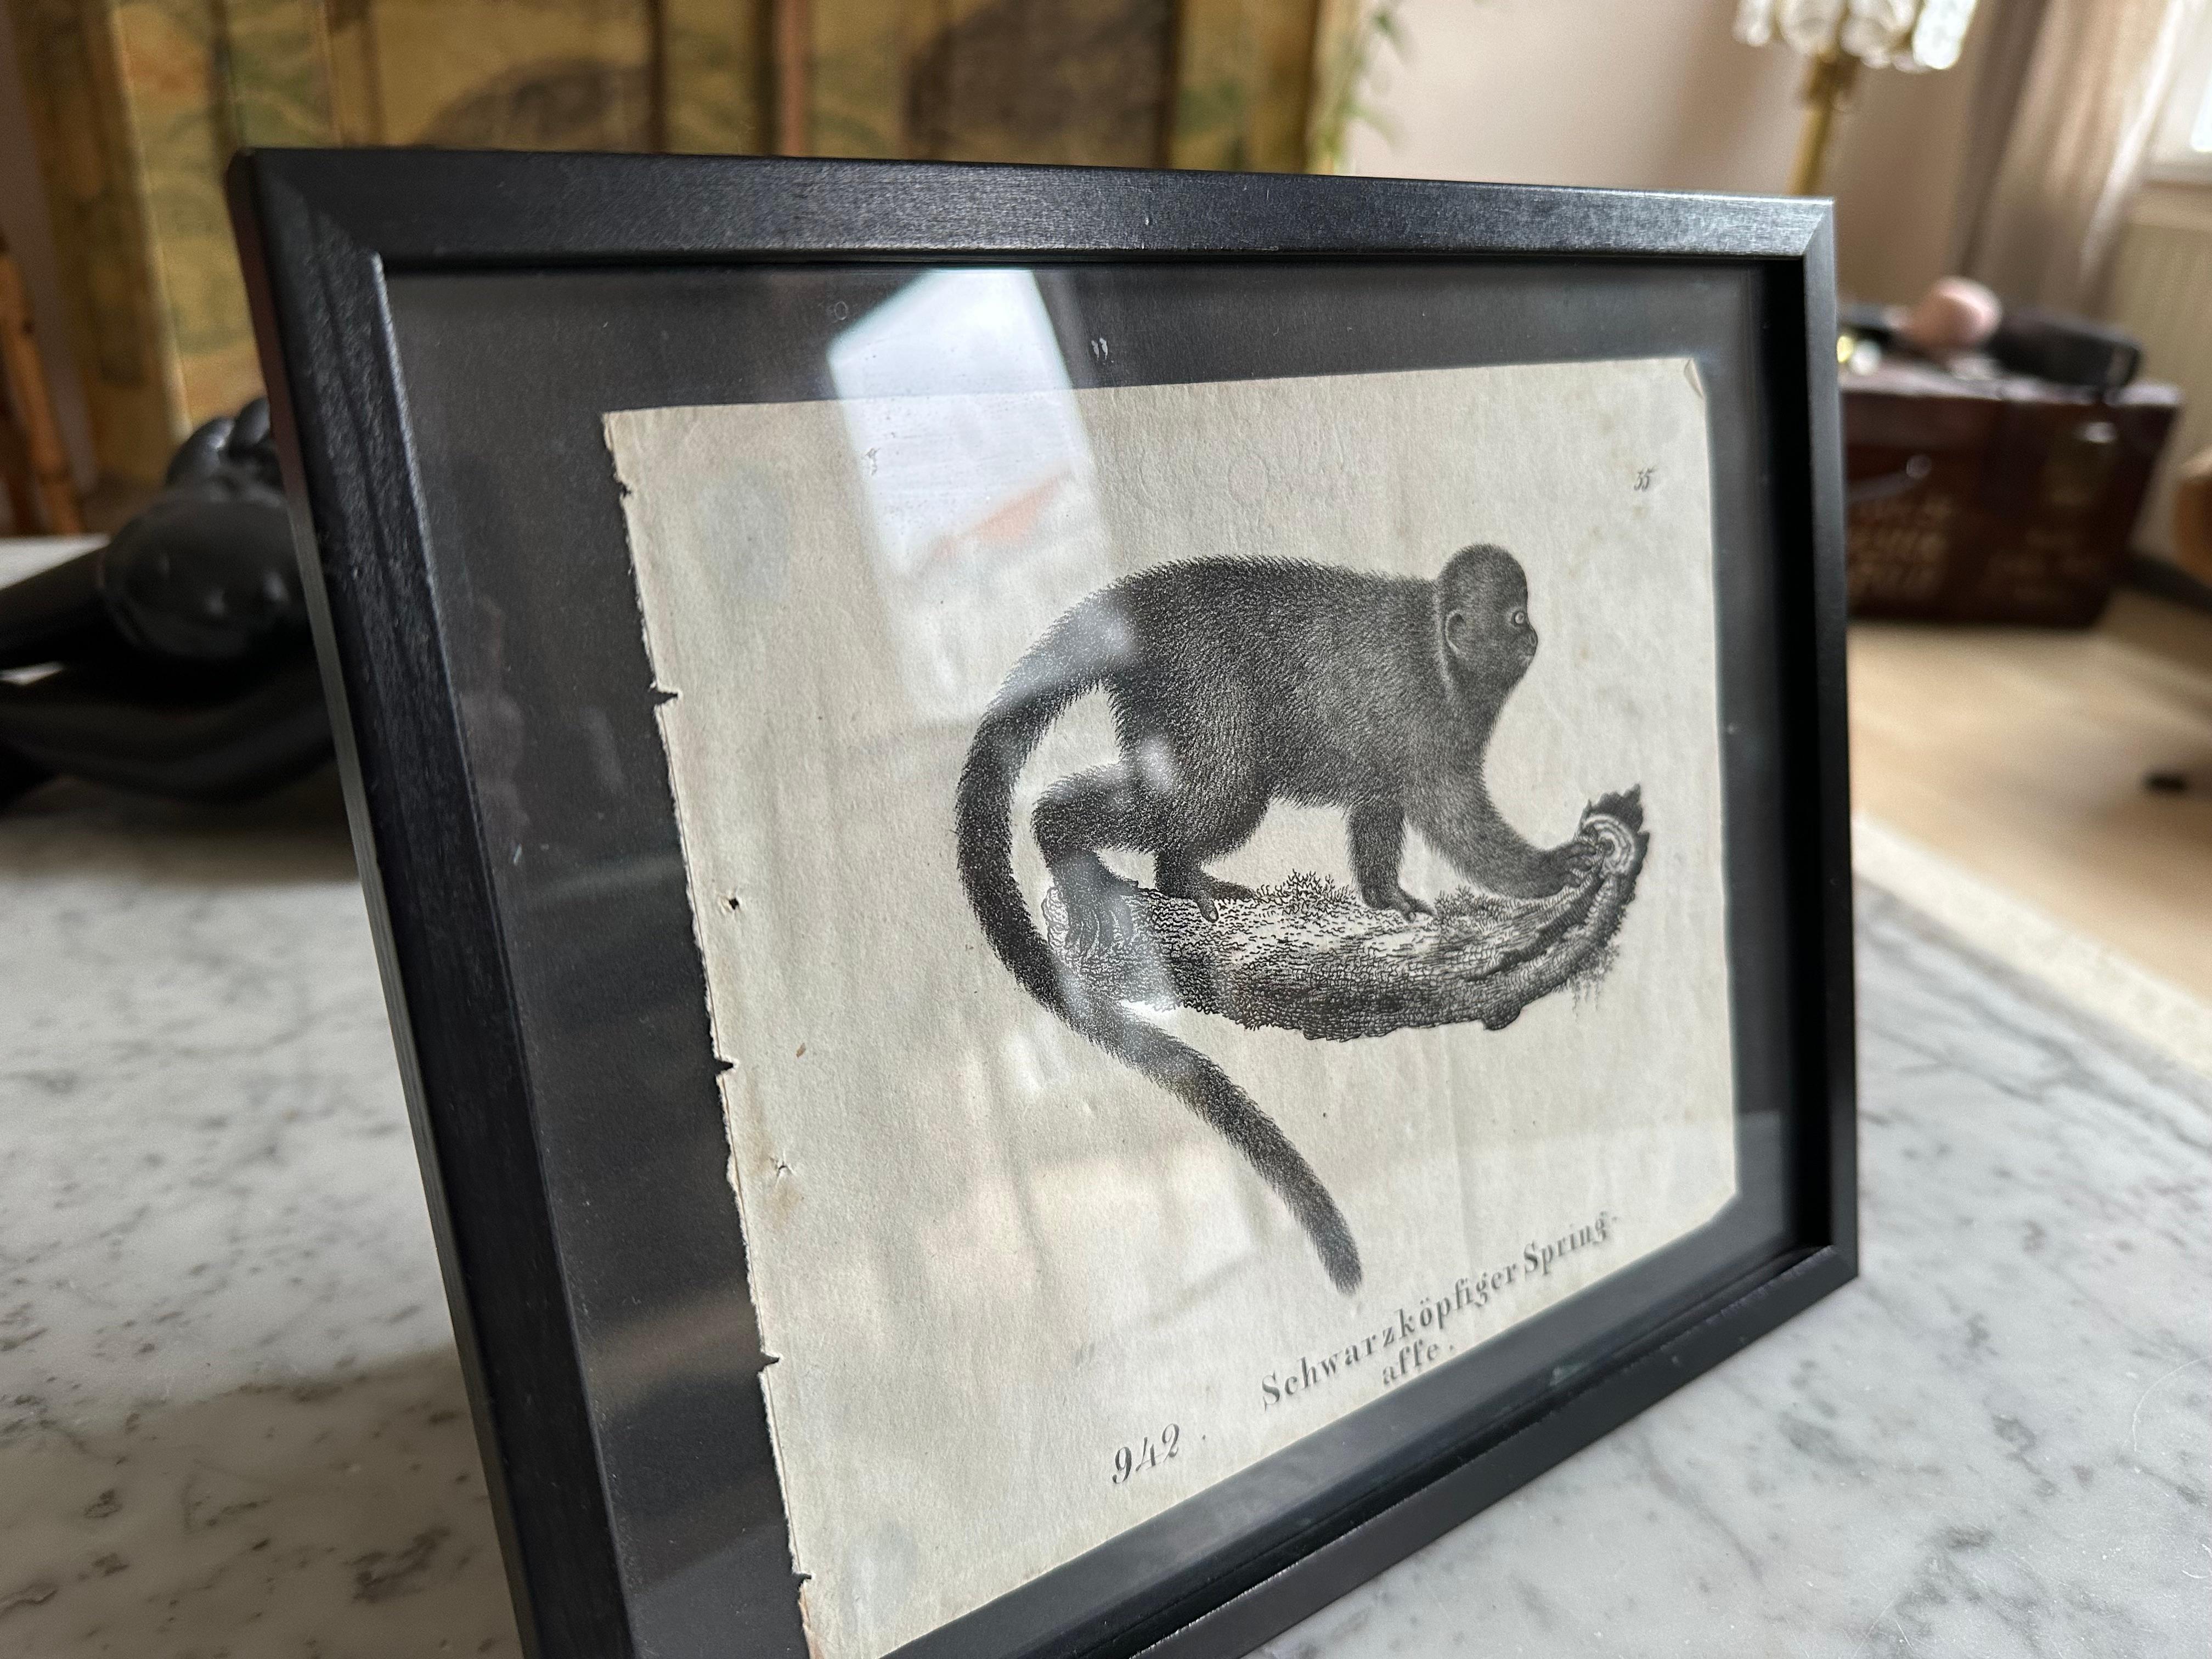 Zoological Original Lithograph Featuring a Monkey from 1831-35 For Sale 1